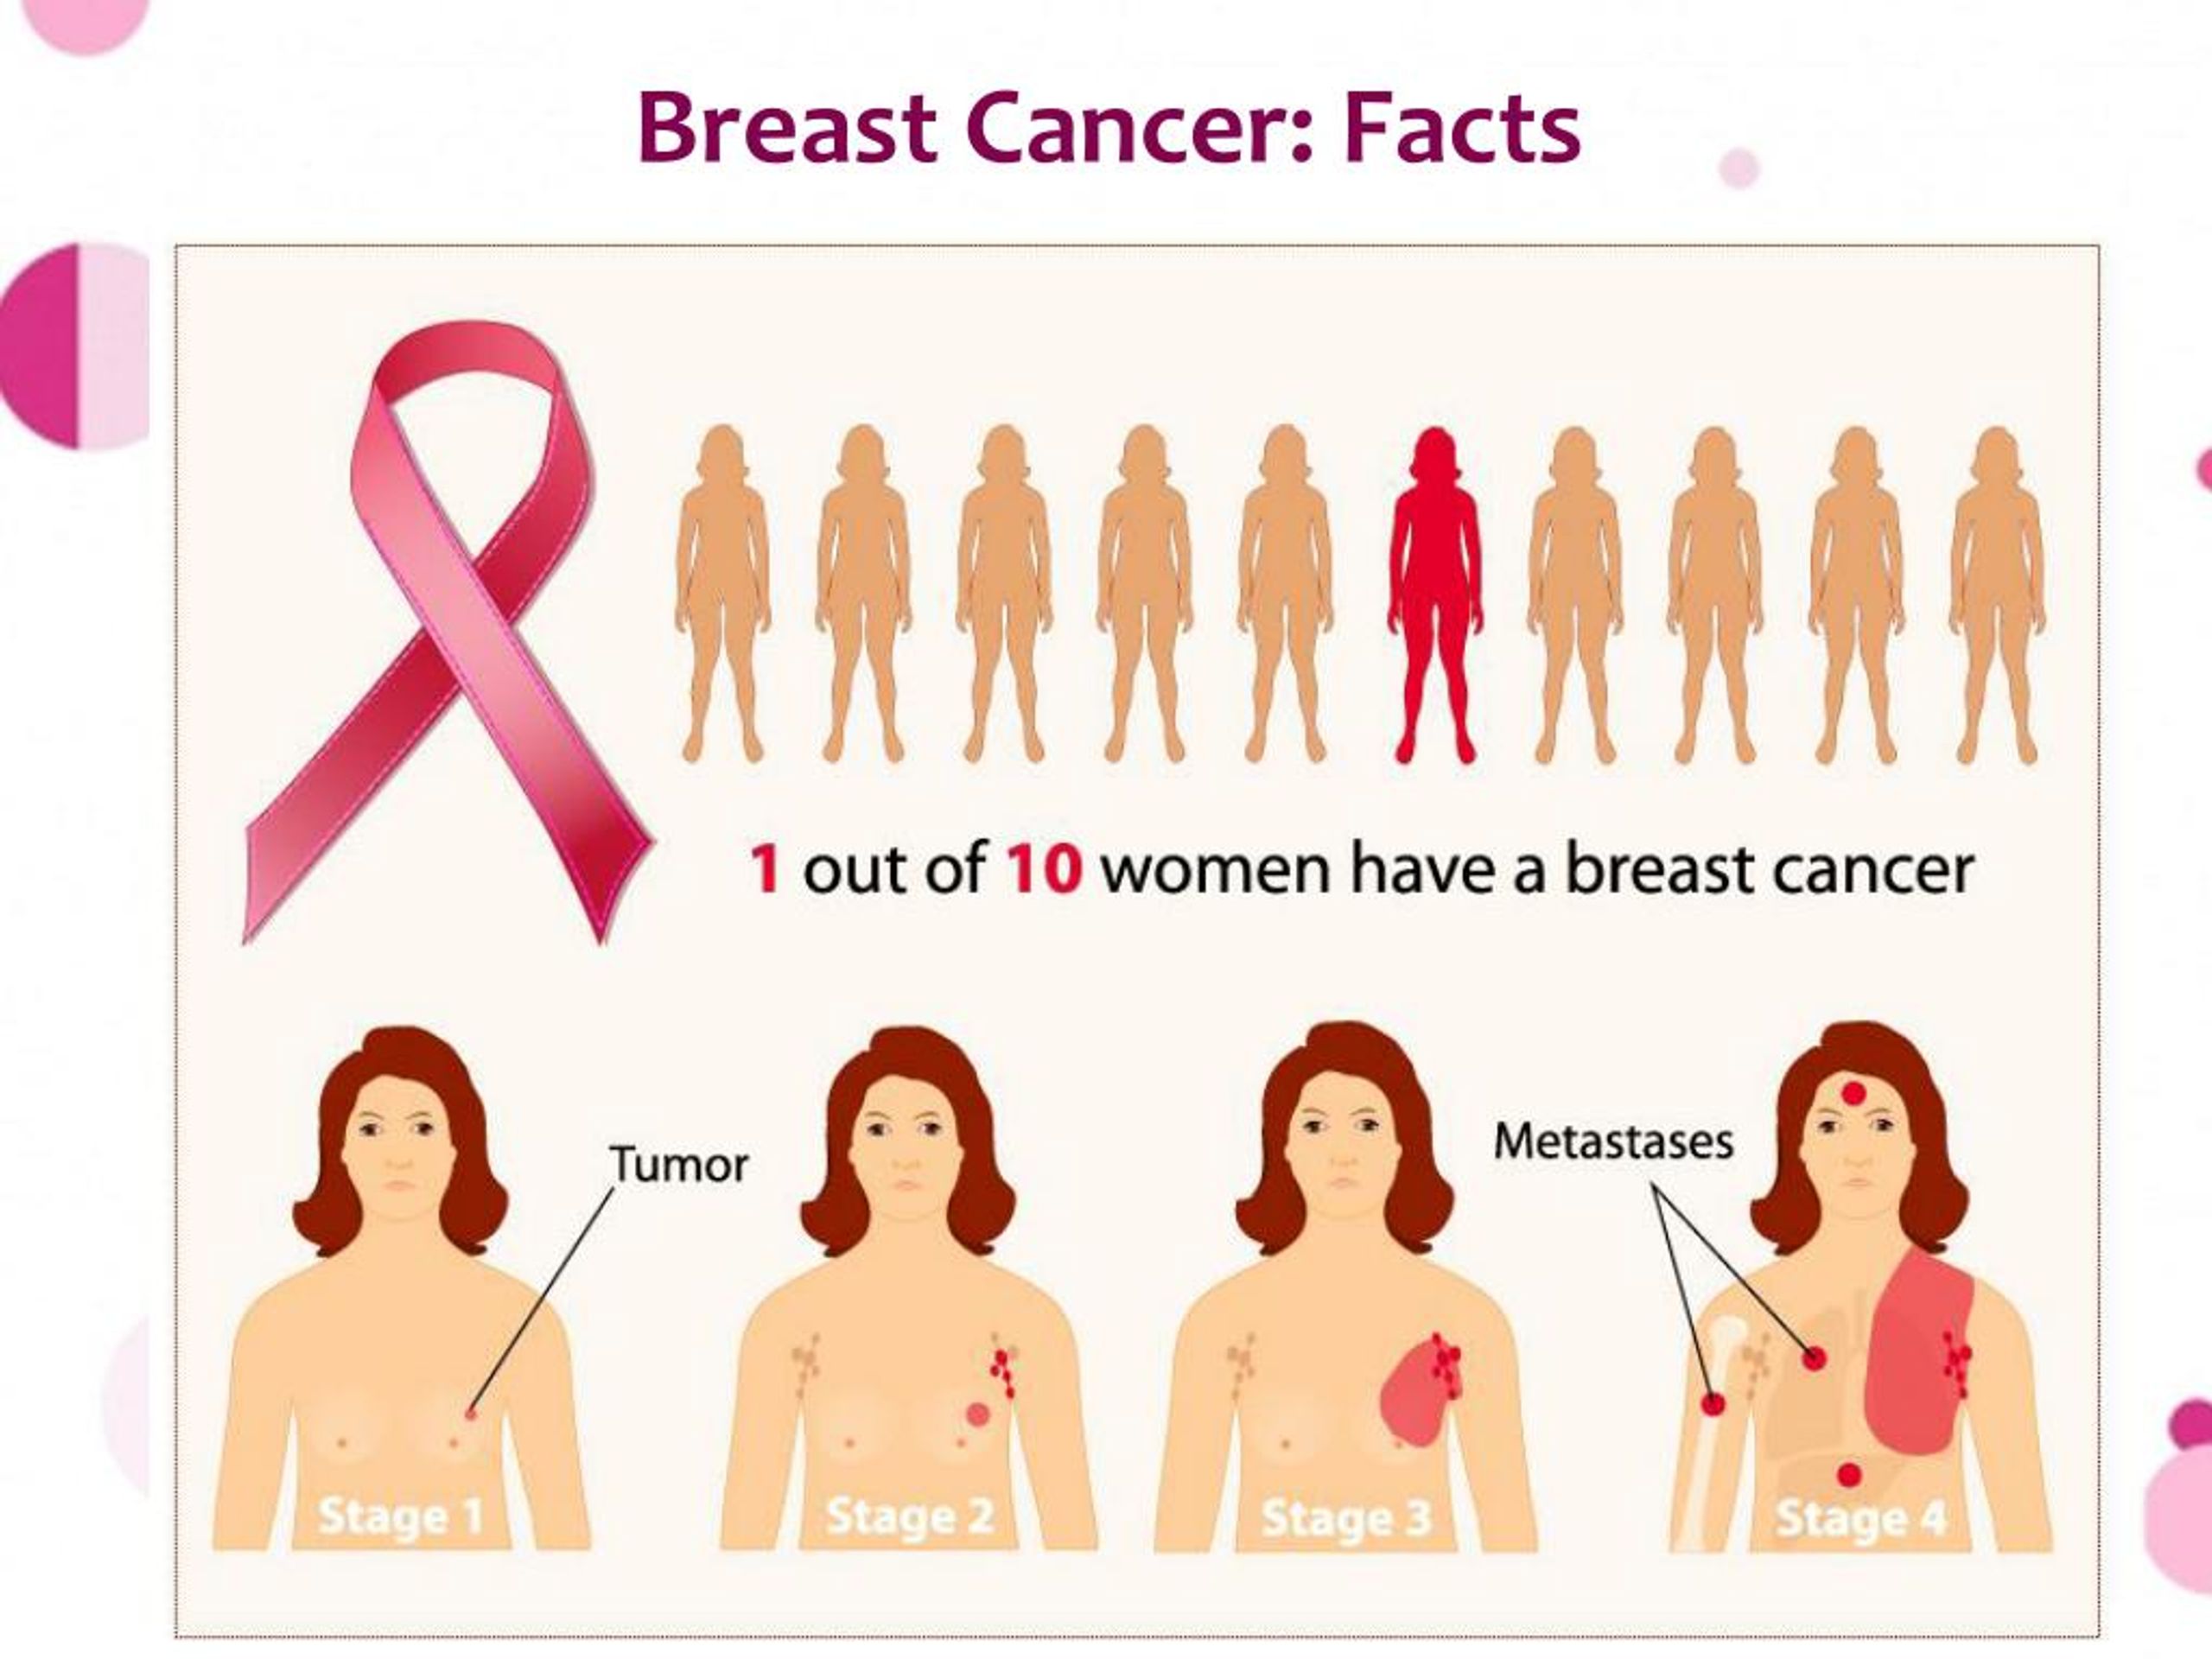 Breast Cancer: Facts.